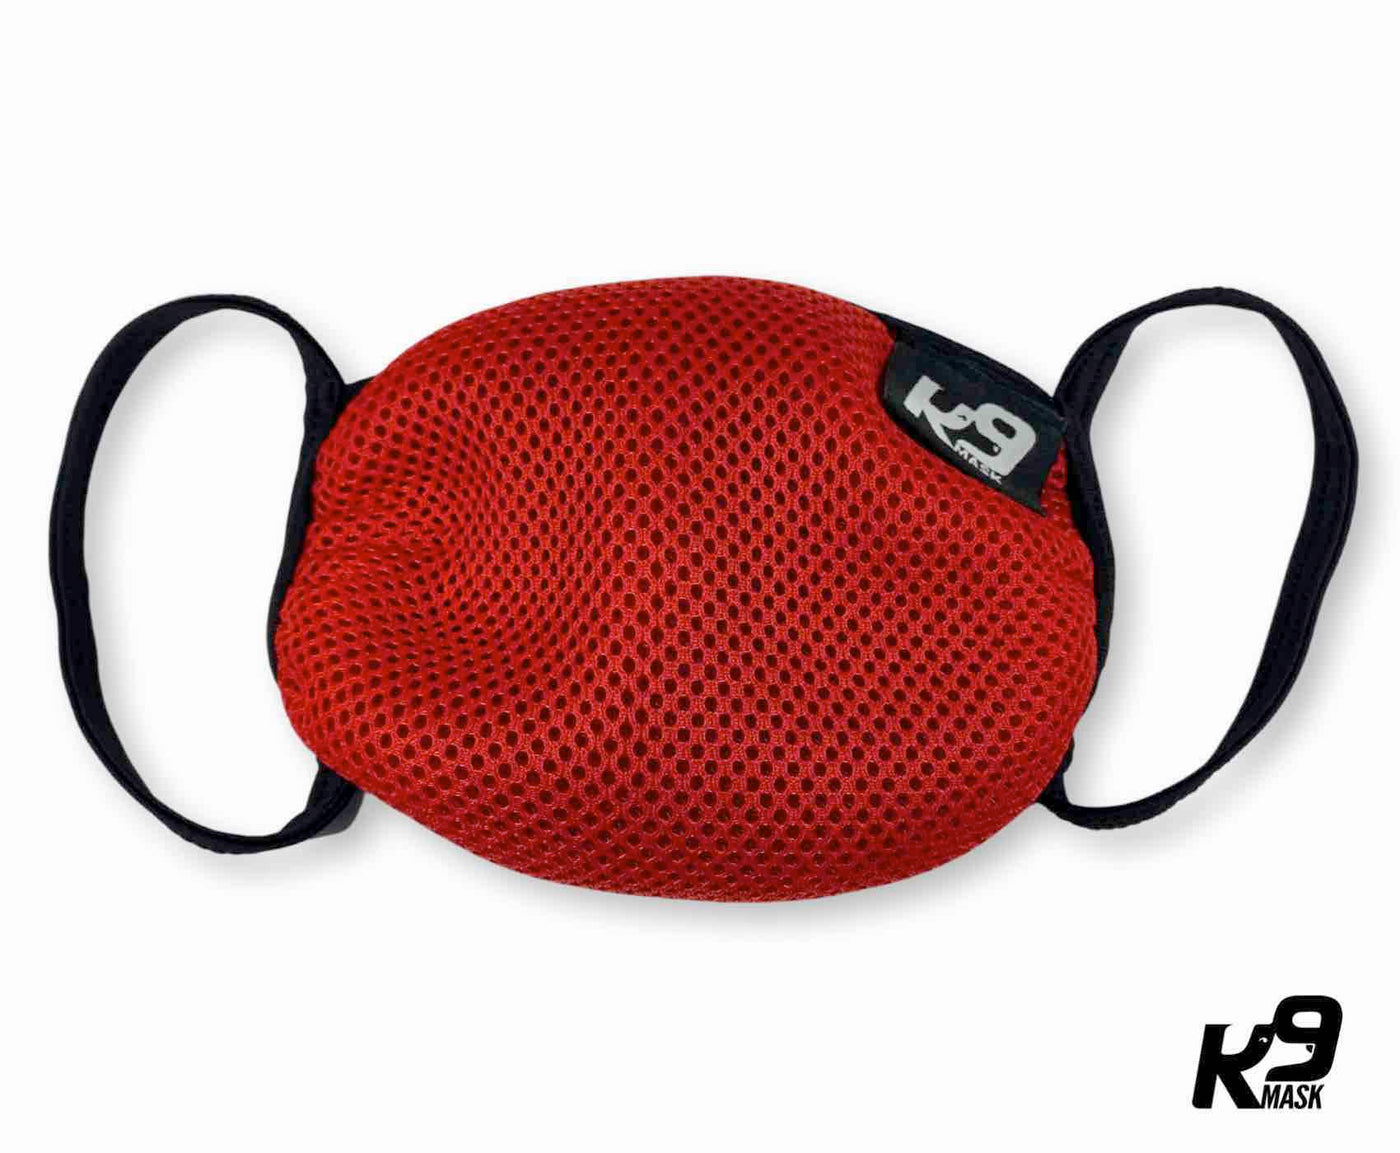 K9 Mask® for Humans clean breathe air face mask red